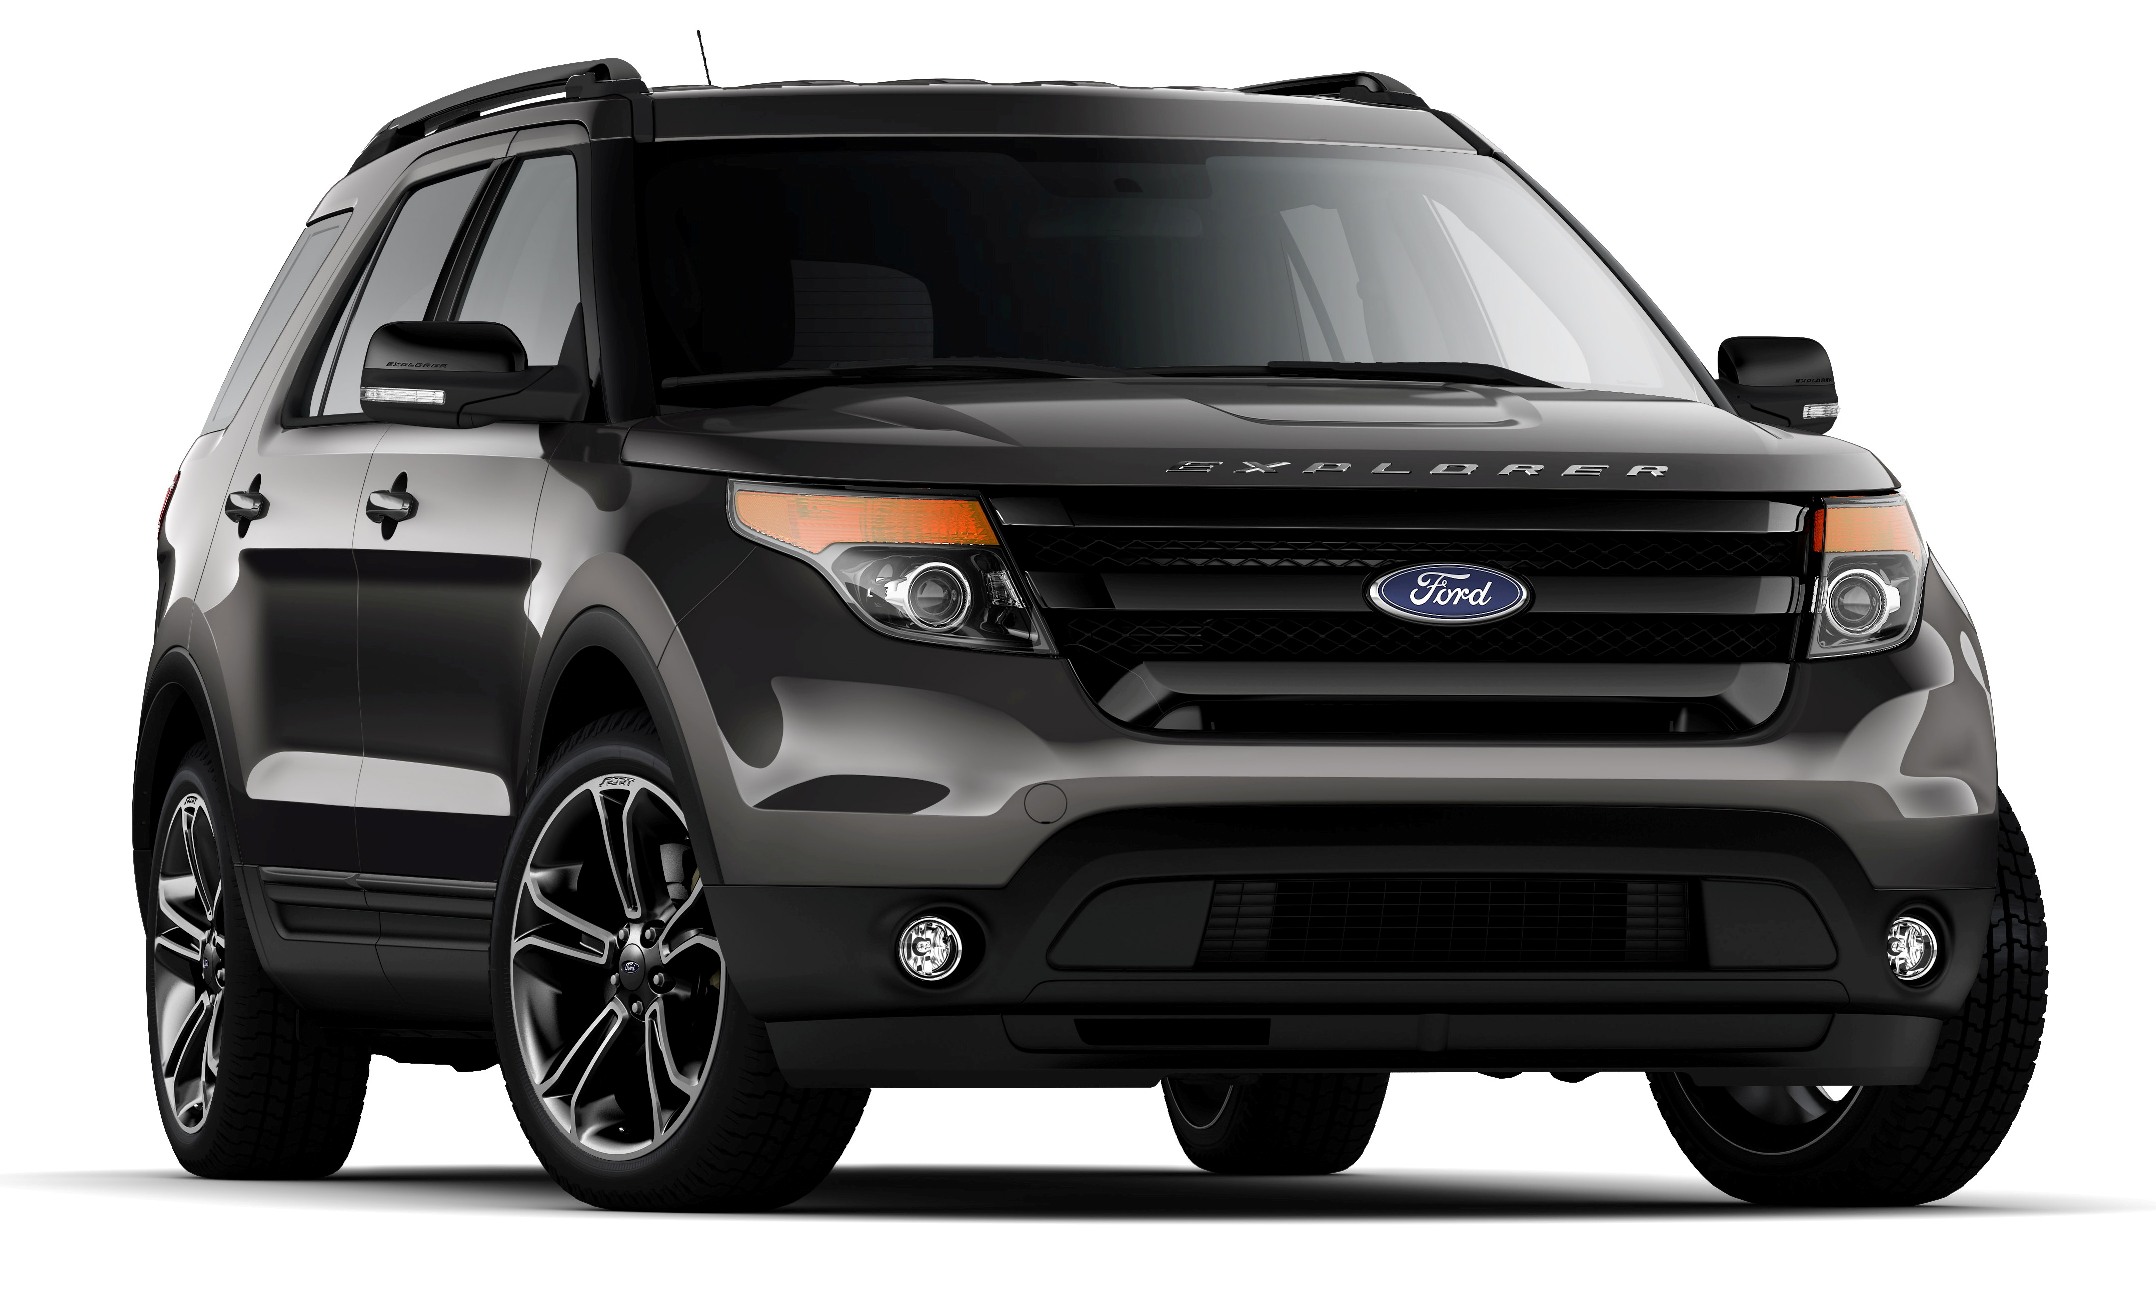 2015 Ford Explorer XLT Appearance Pack Adds 2 0L Turbo Big Wheels and 